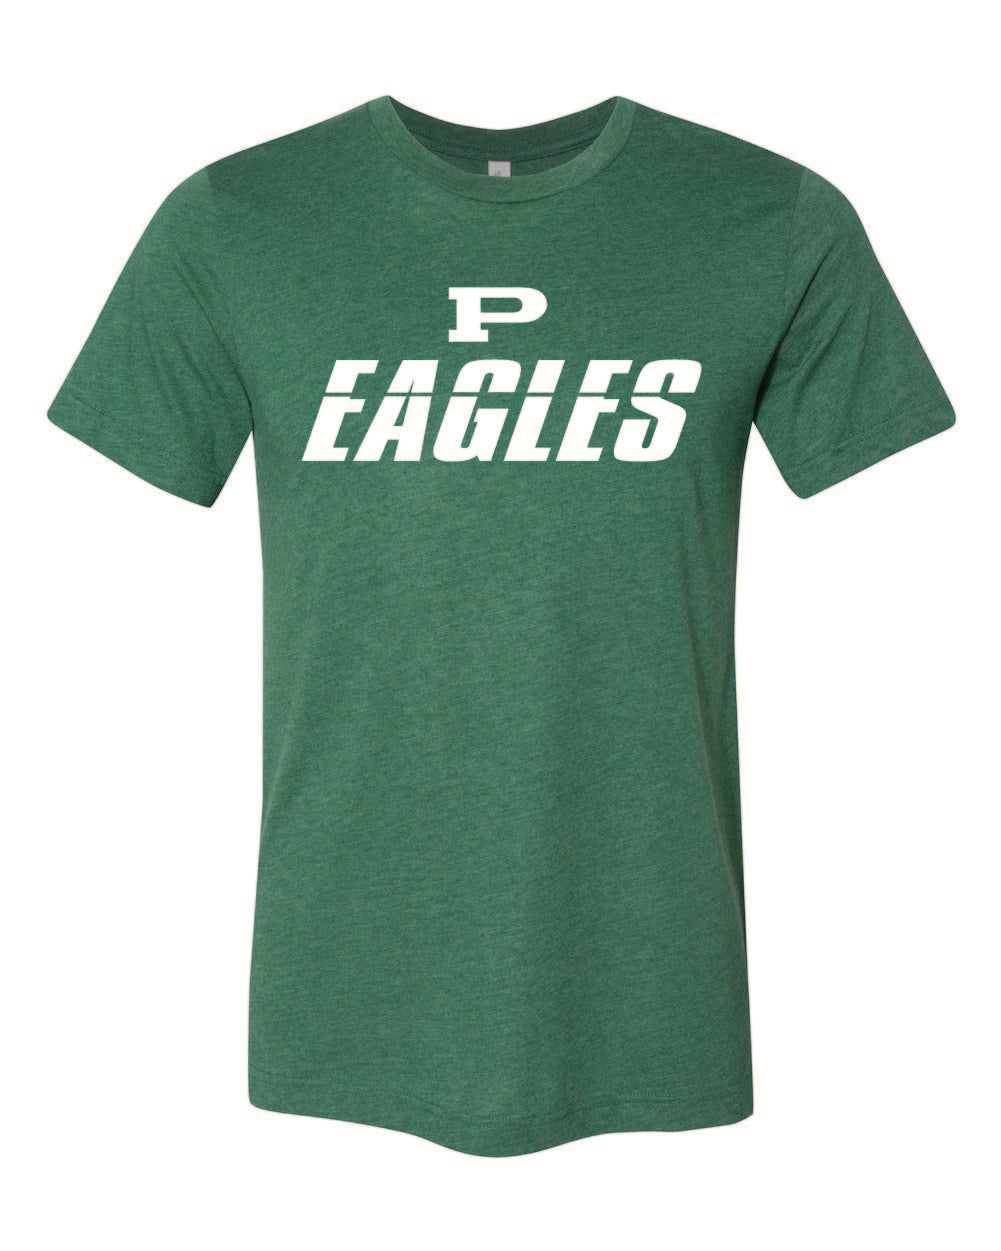 P Eagles with Line